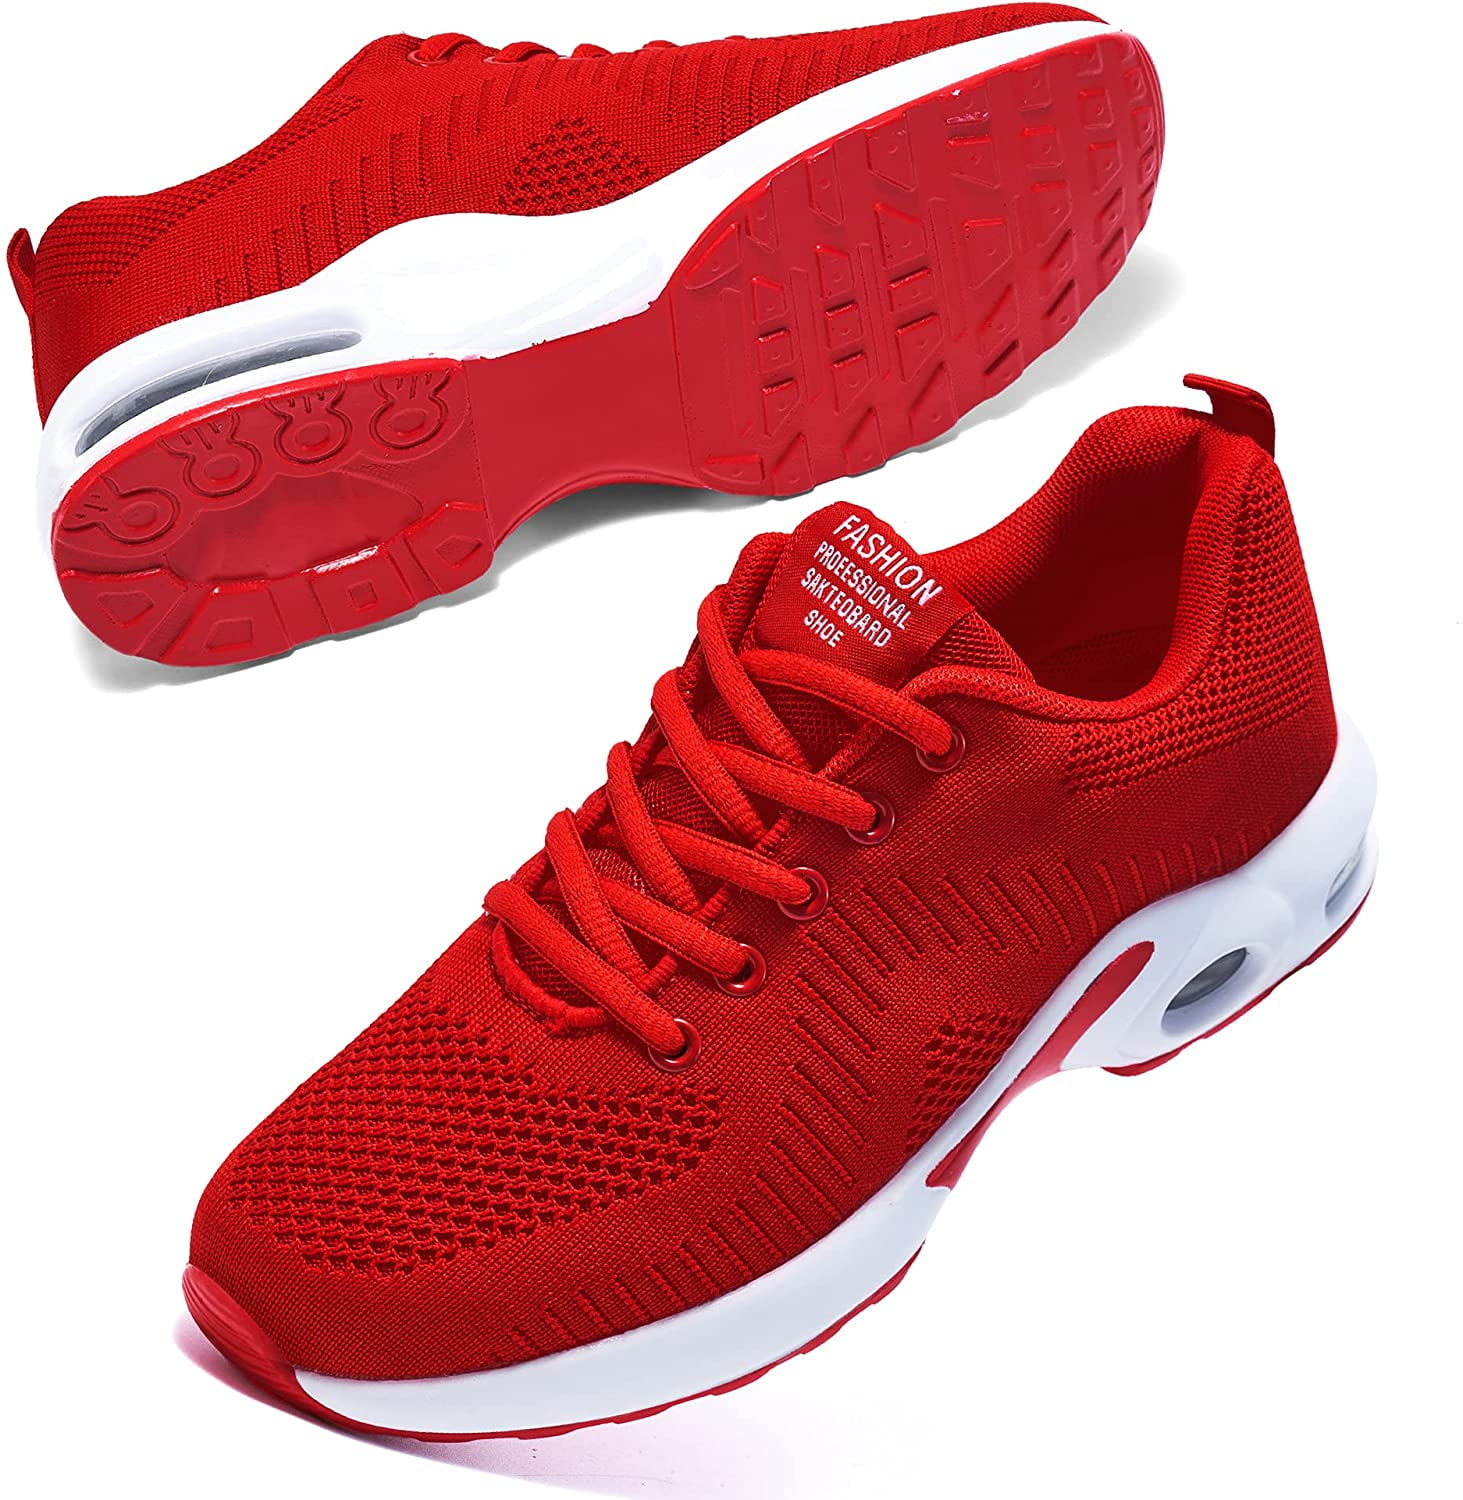 FLARUT Women Trainers Athletic Running Shoes Breathable Sport Walking Sneakers Lightweight Tennis Shoes